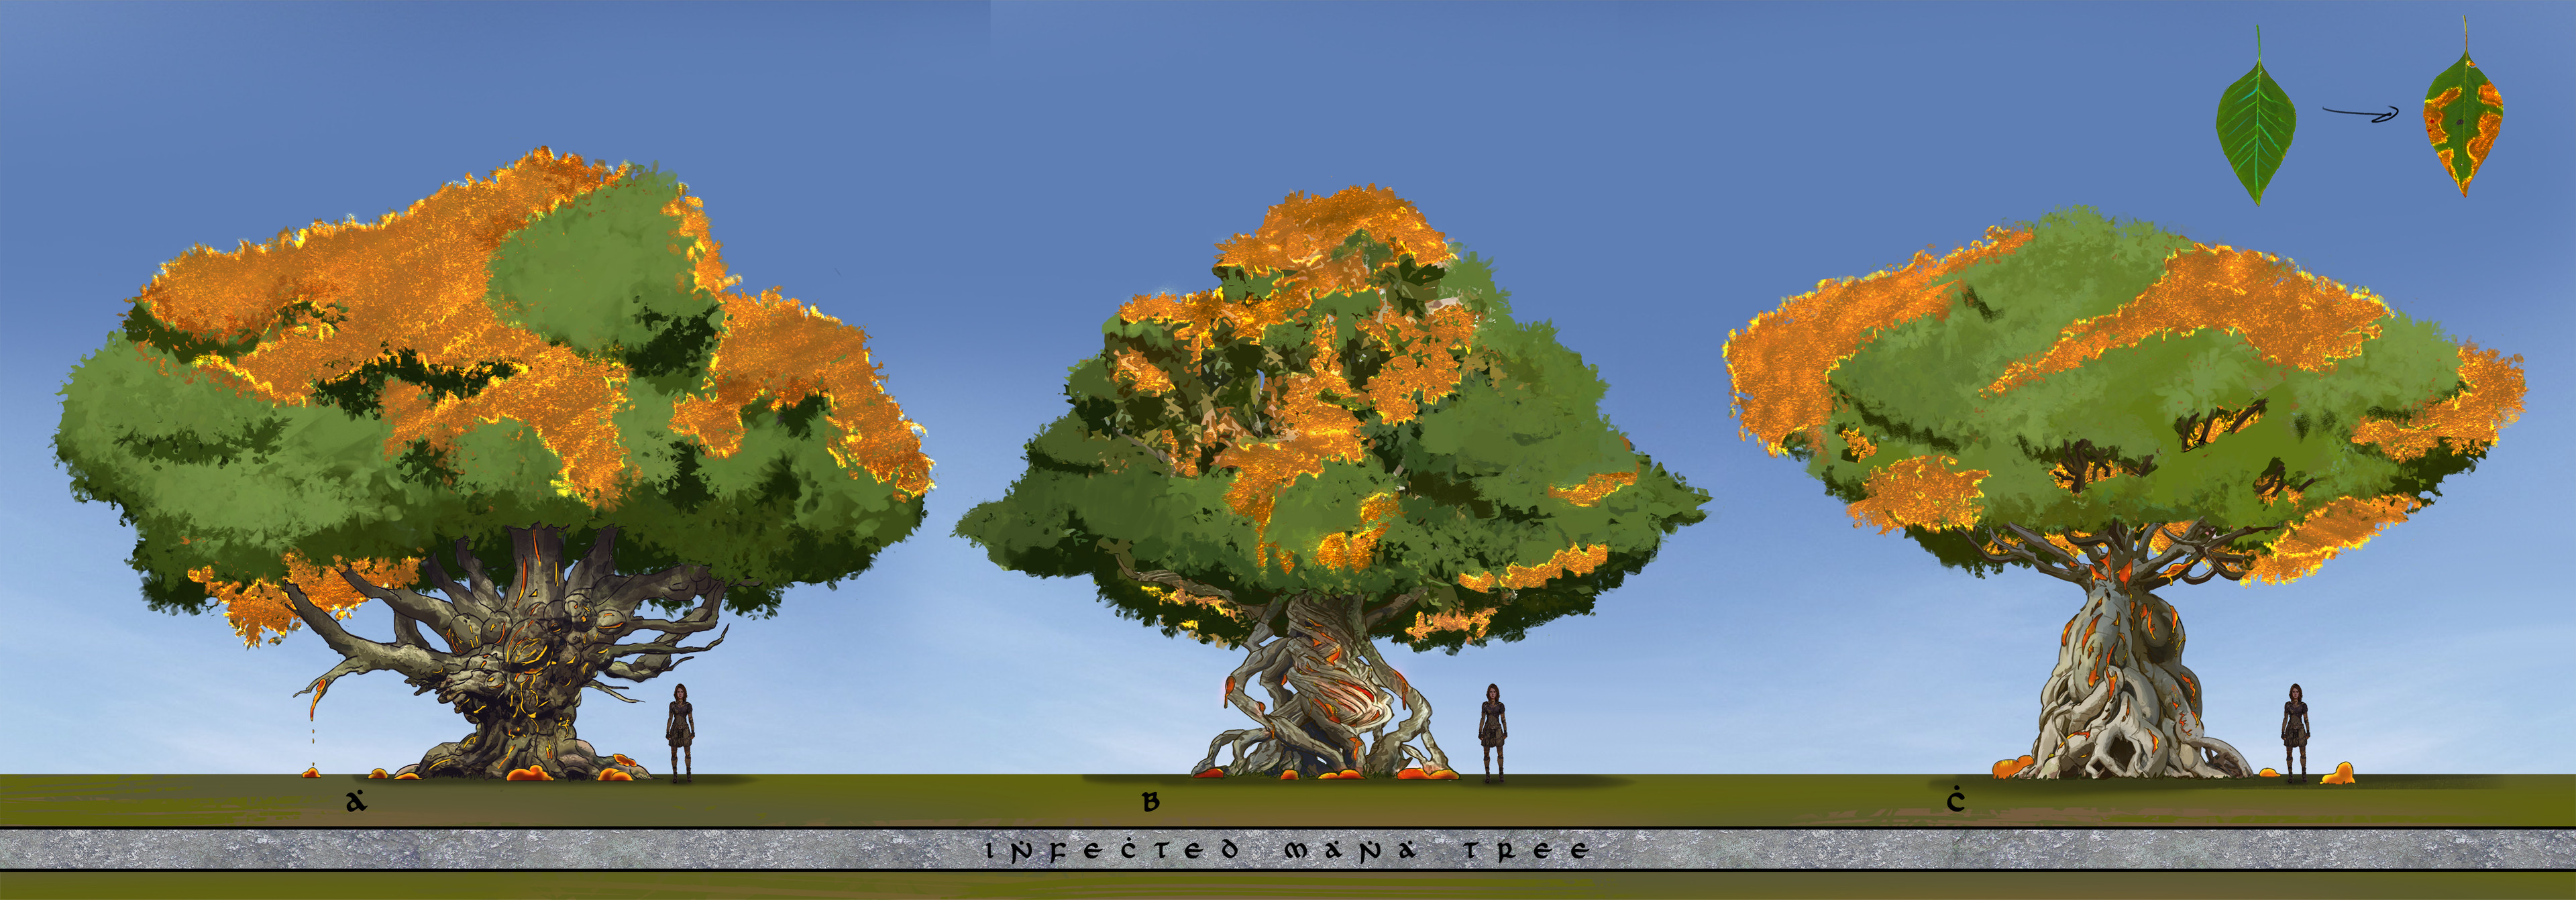 Variations on the hero tree for the level, the tree is the central energy source for the mana forest.